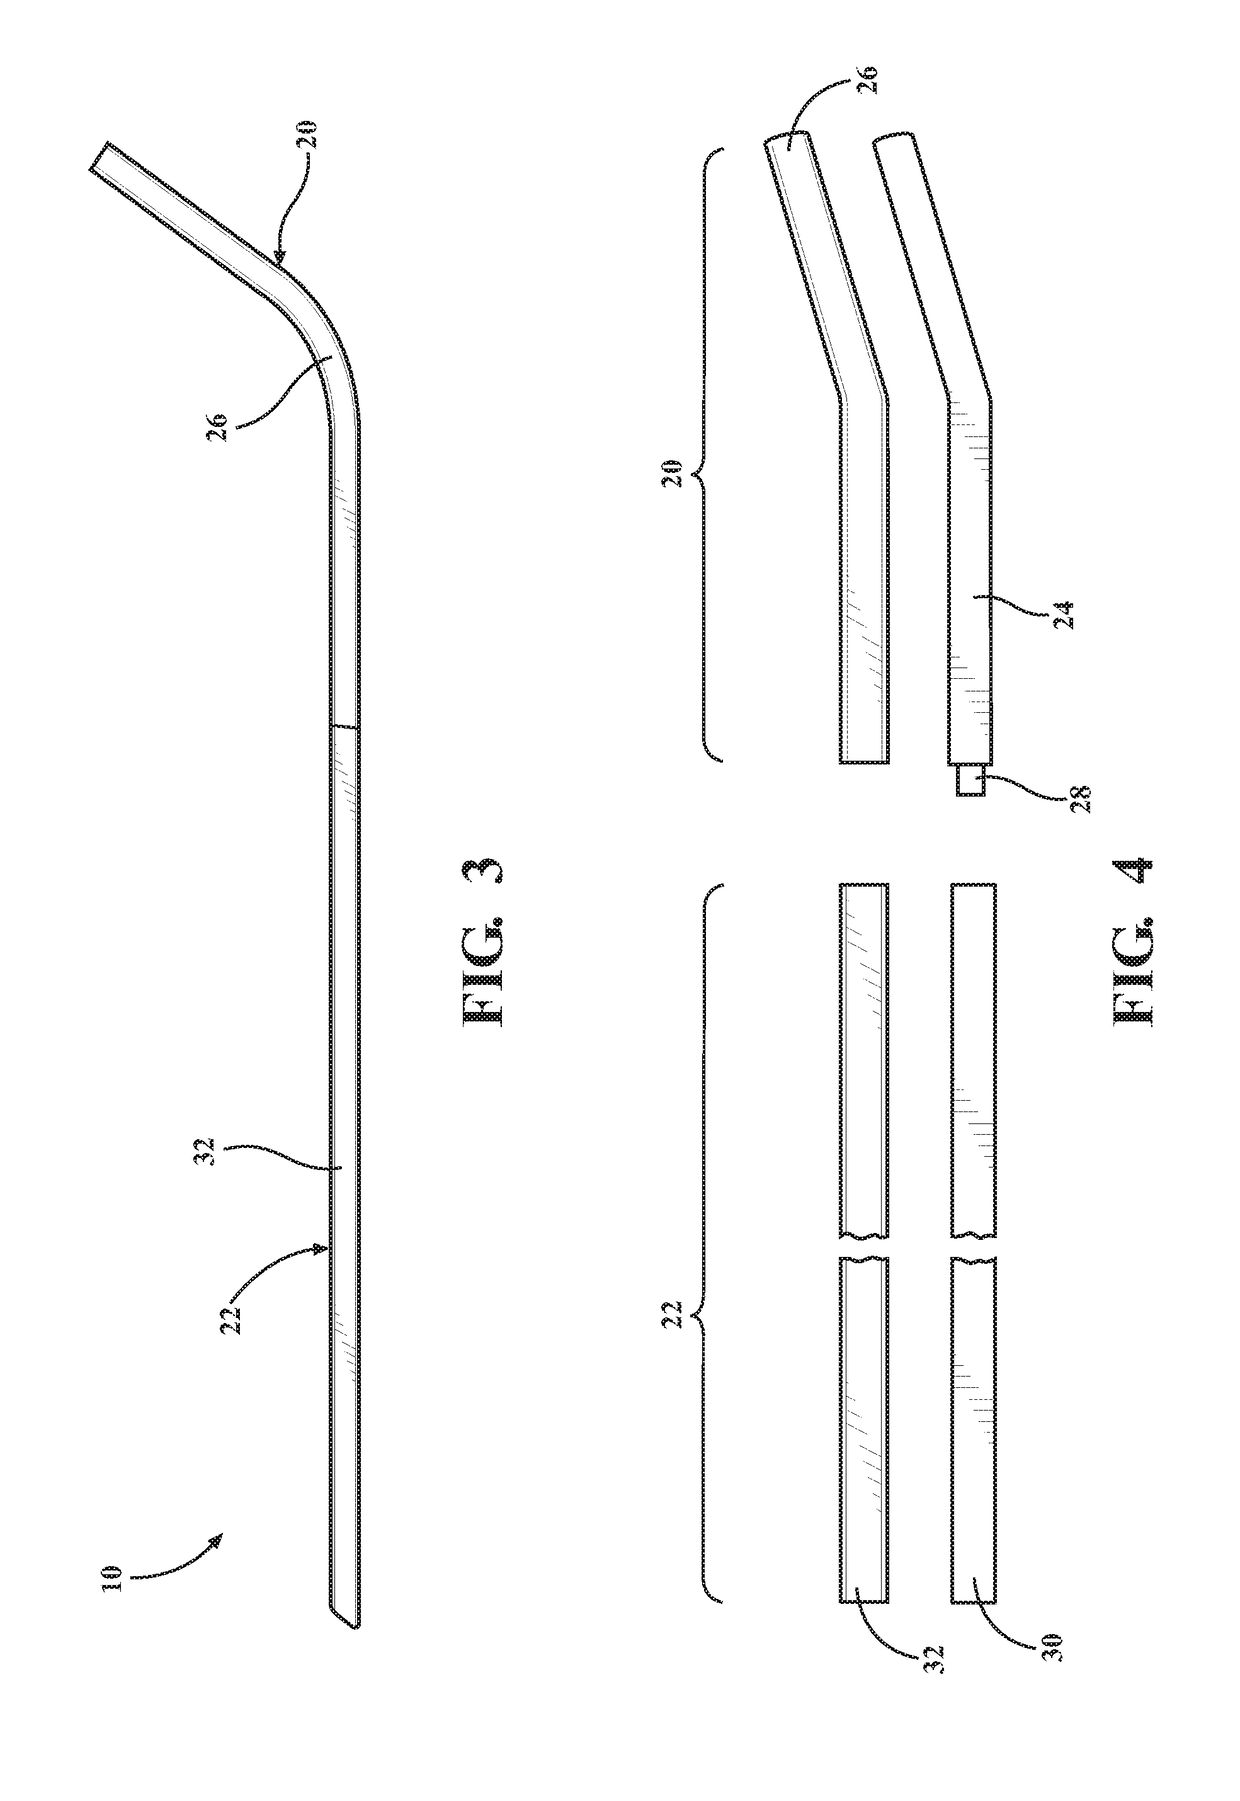 Trim strip assembly for vehicle and method of manufacturing same